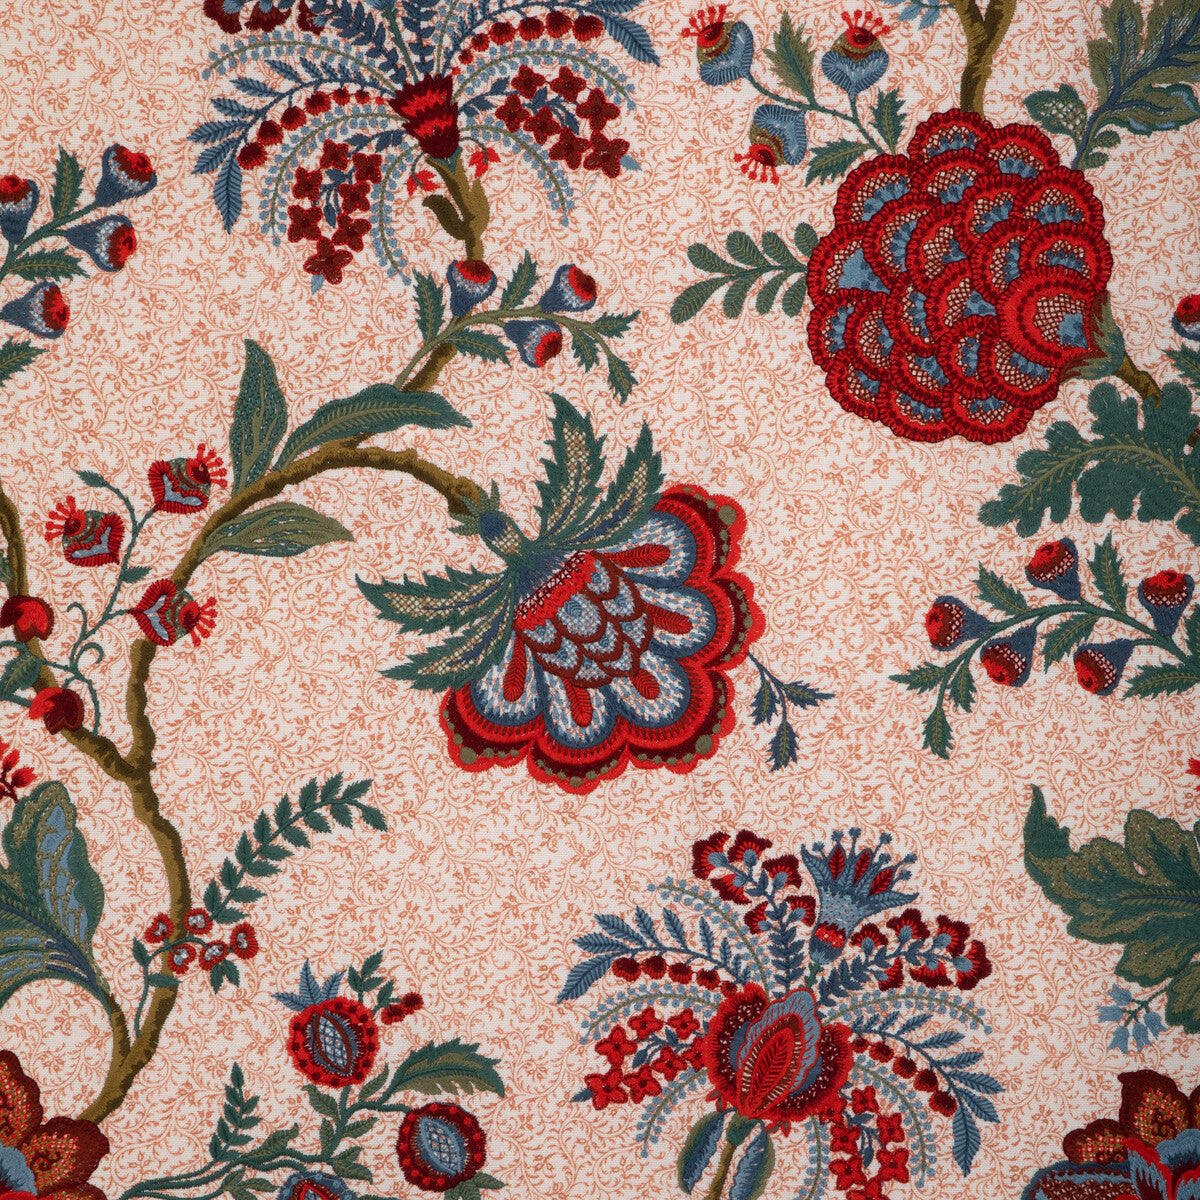 Anduze Emb fabric in red/blue color - pattern 8023118.195.0 - by Brunschwig &amp; Fils in the Anduze Embroideries collection